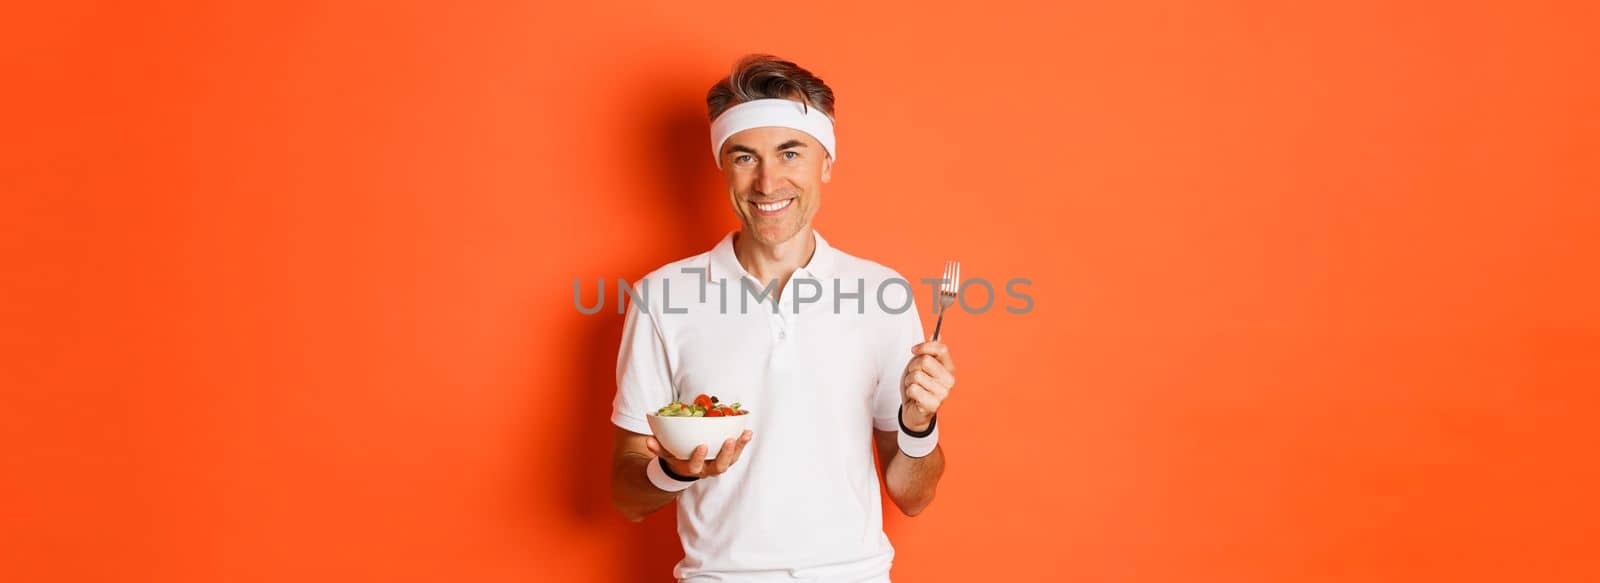 Concept of sport, fitness and lifestyle. Image of handsome, healthy and active male athlete, eating salad and smiling, standing over orange background.